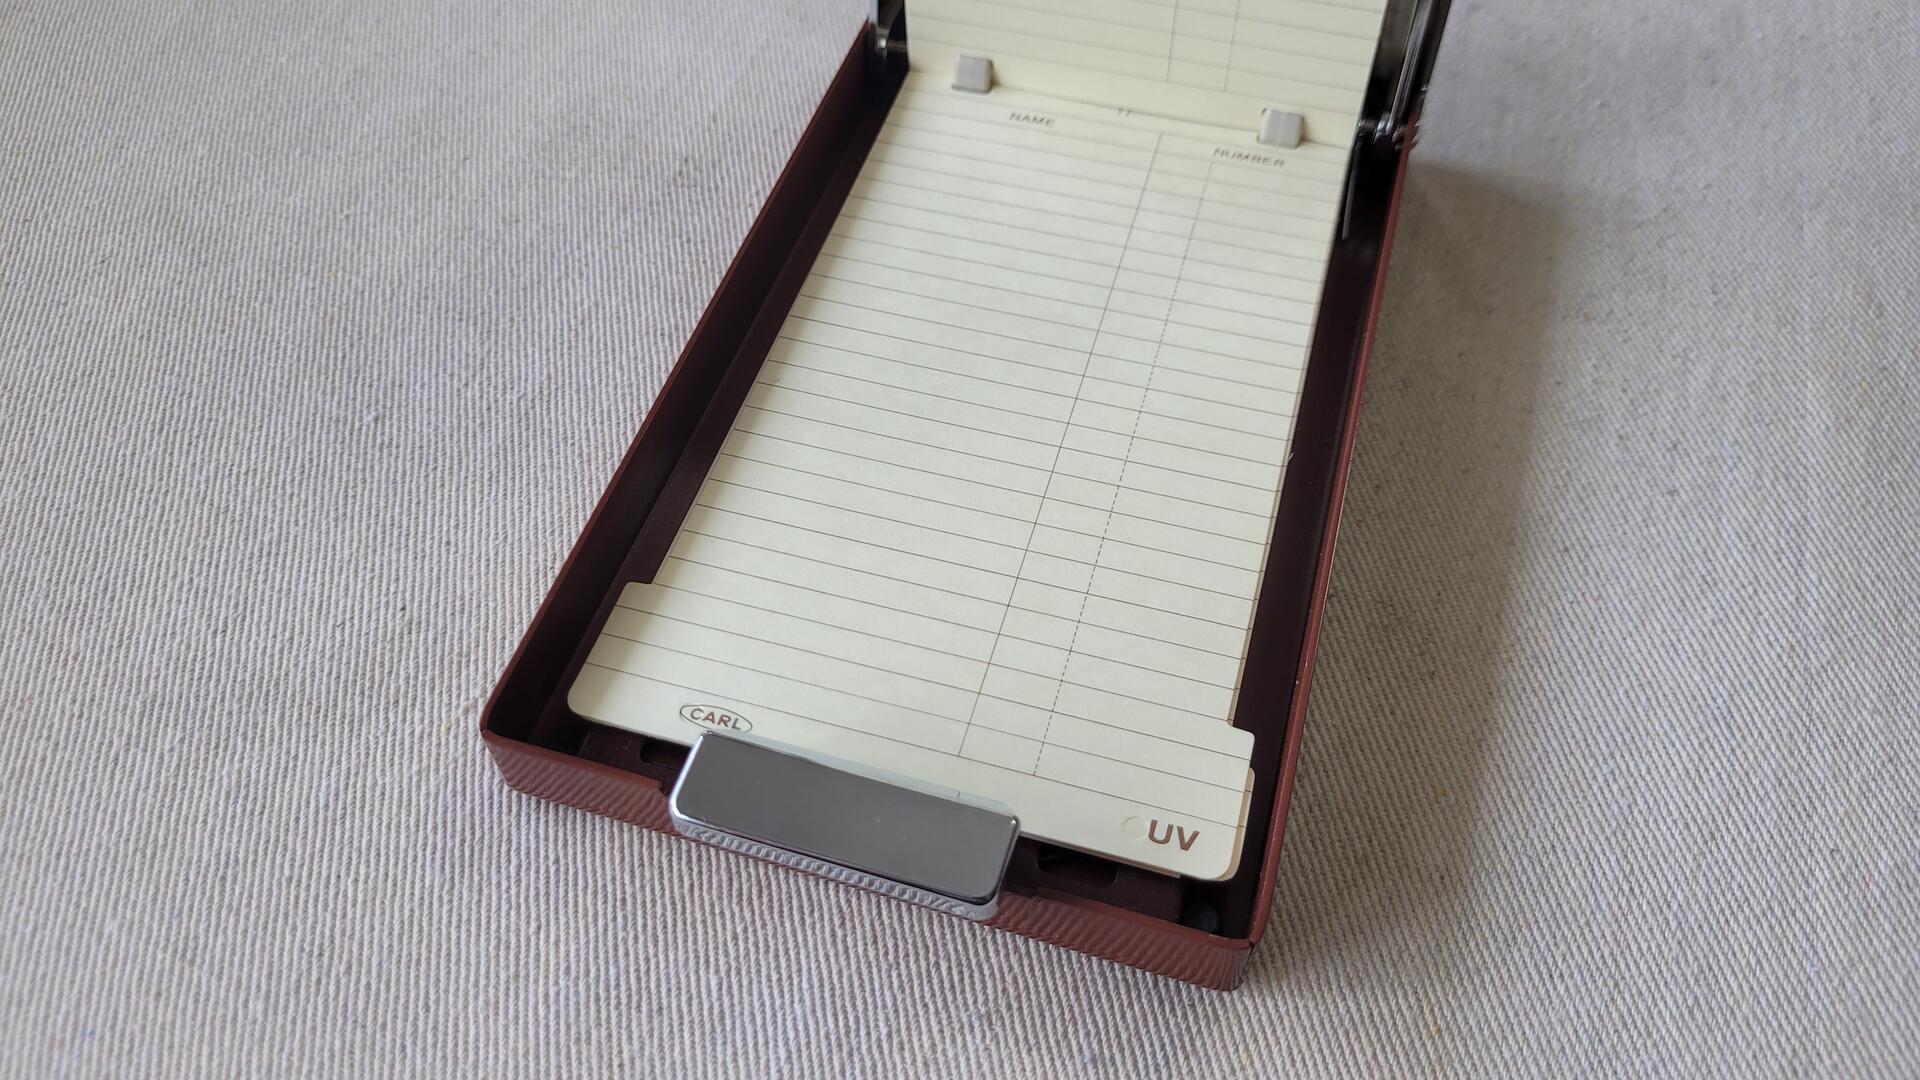 Retro Carl No. 560-D Deluxe Telephone list finder w original box. Vintage 1970s made in Japan collectible office stationery & flip top desk address book